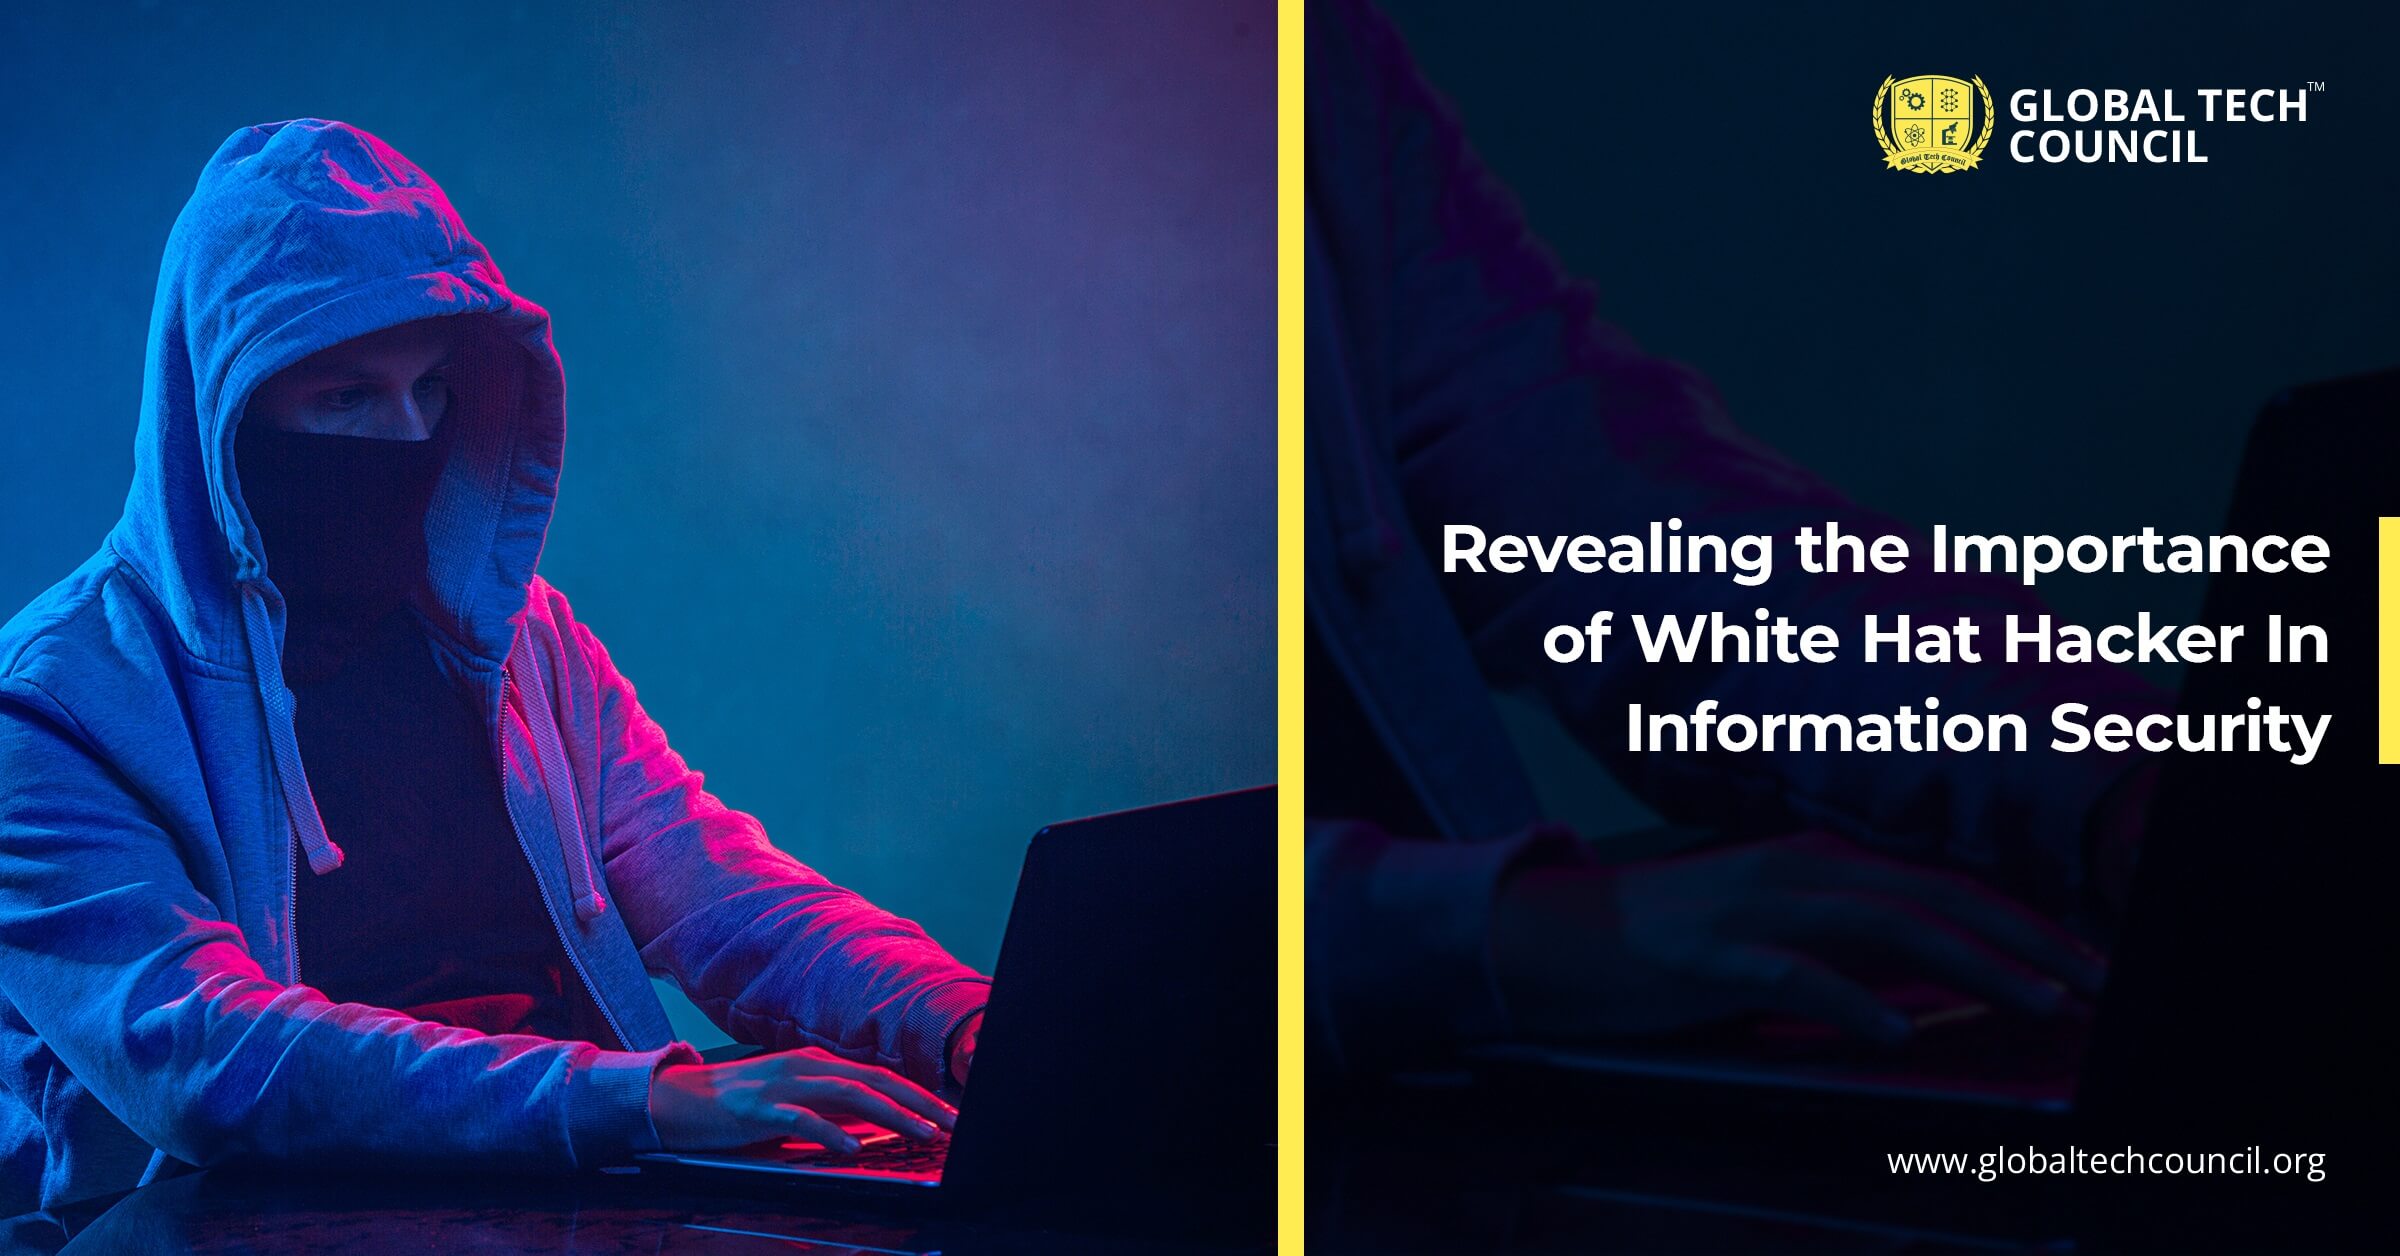 Revealing the Importance of White Hat Hacker In Information Security